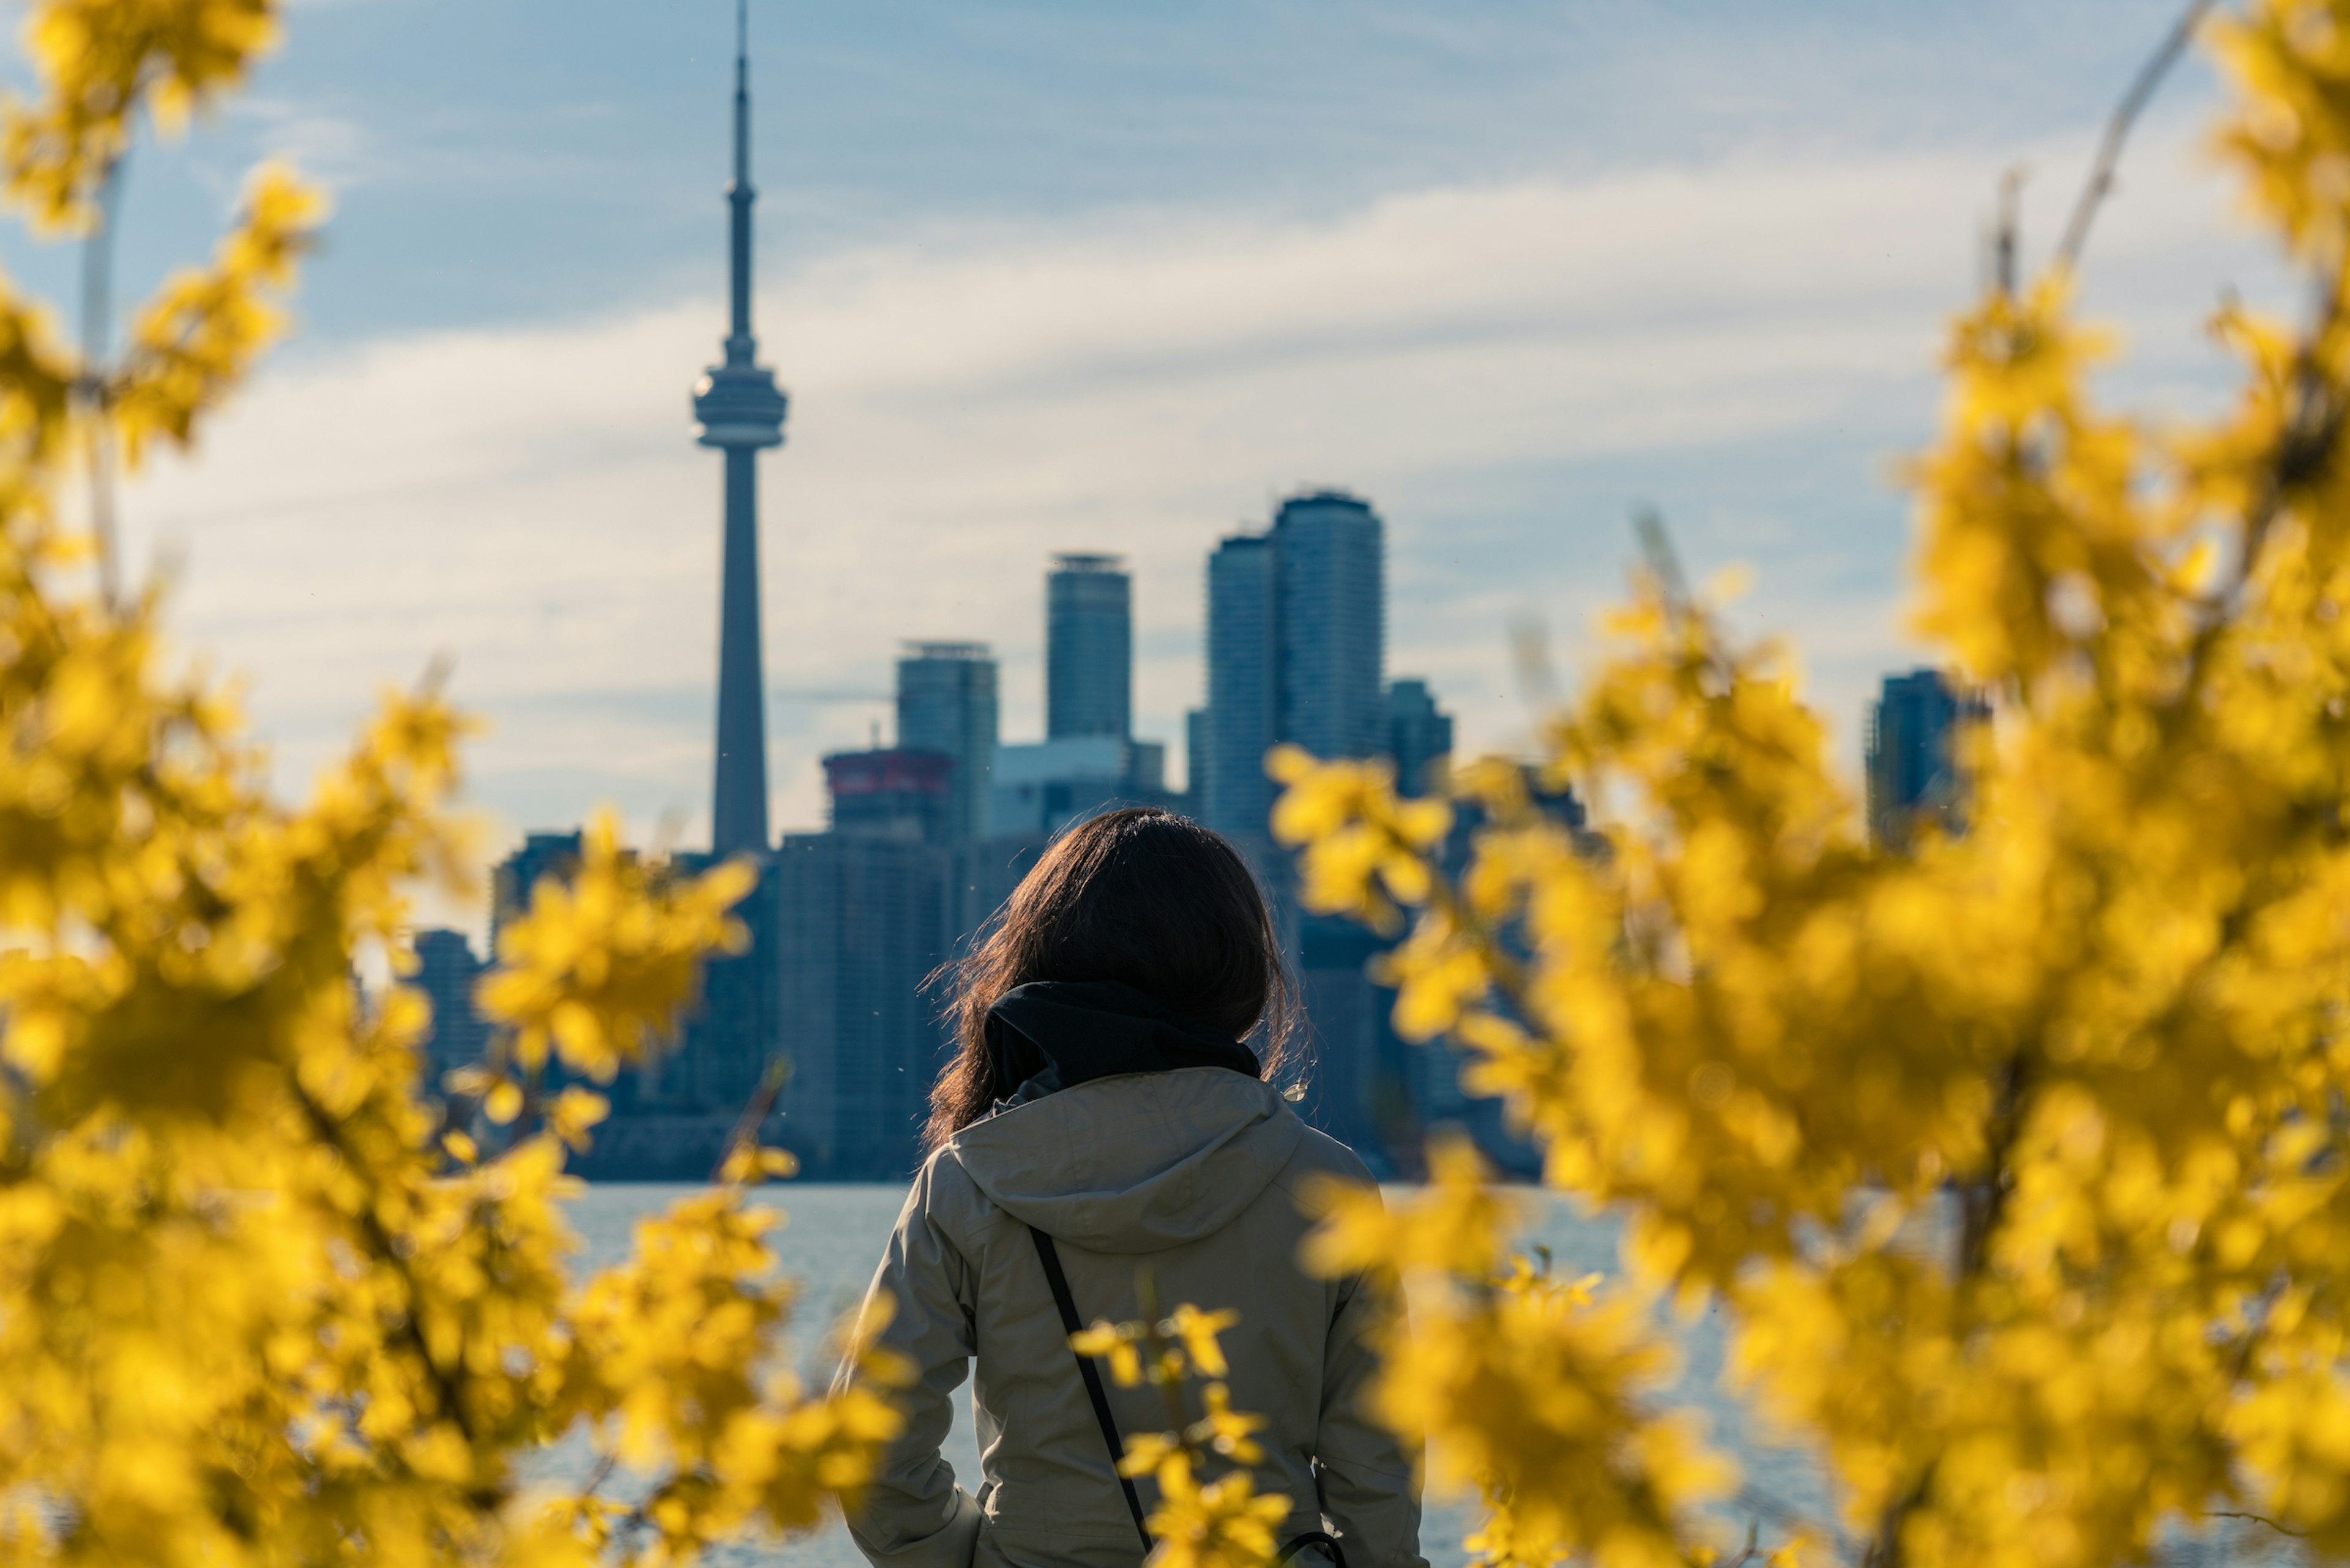 Girl looking at Toronto skyline.View from Toronto islands. Framed with trees.; Shutterstock ID 672088498; your: Brian Healy; gl: 65050 ; netsuite: Lonely Planet Online Editorial; full: Best time to visit Toronto